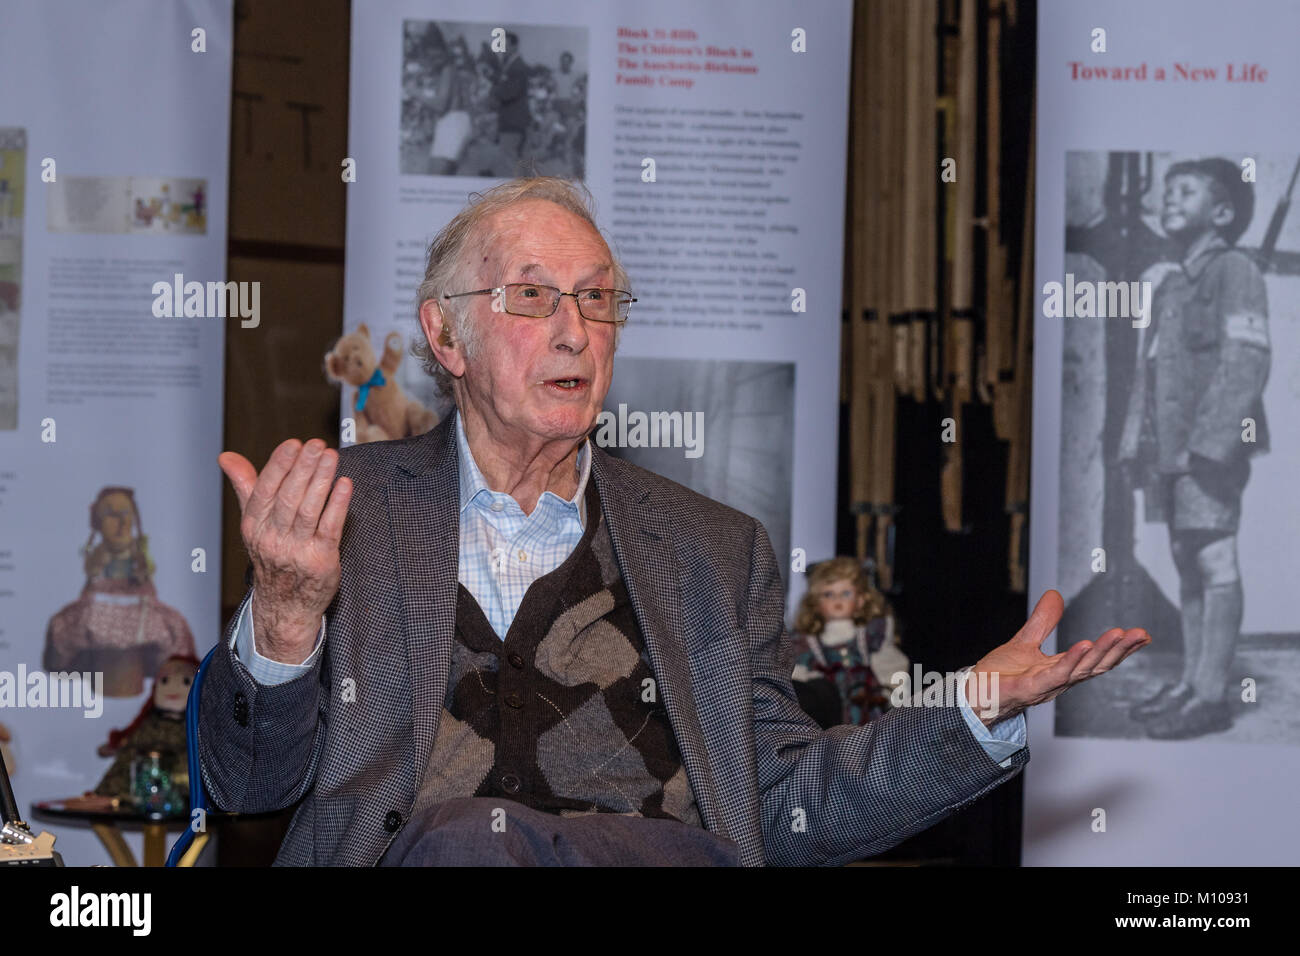 Brentwood, Essex, 25th January 2018, Herman Rothman, (93) Holocaust survivor and one of the men who found and translated Hitler's Will (and author of the book of the same name) speaking at the Holocaust event 'No Child's Play'  Holocaust event in Brentwood, Essex  Credit: Ian Davidson/Alamy Live News Stock Photo